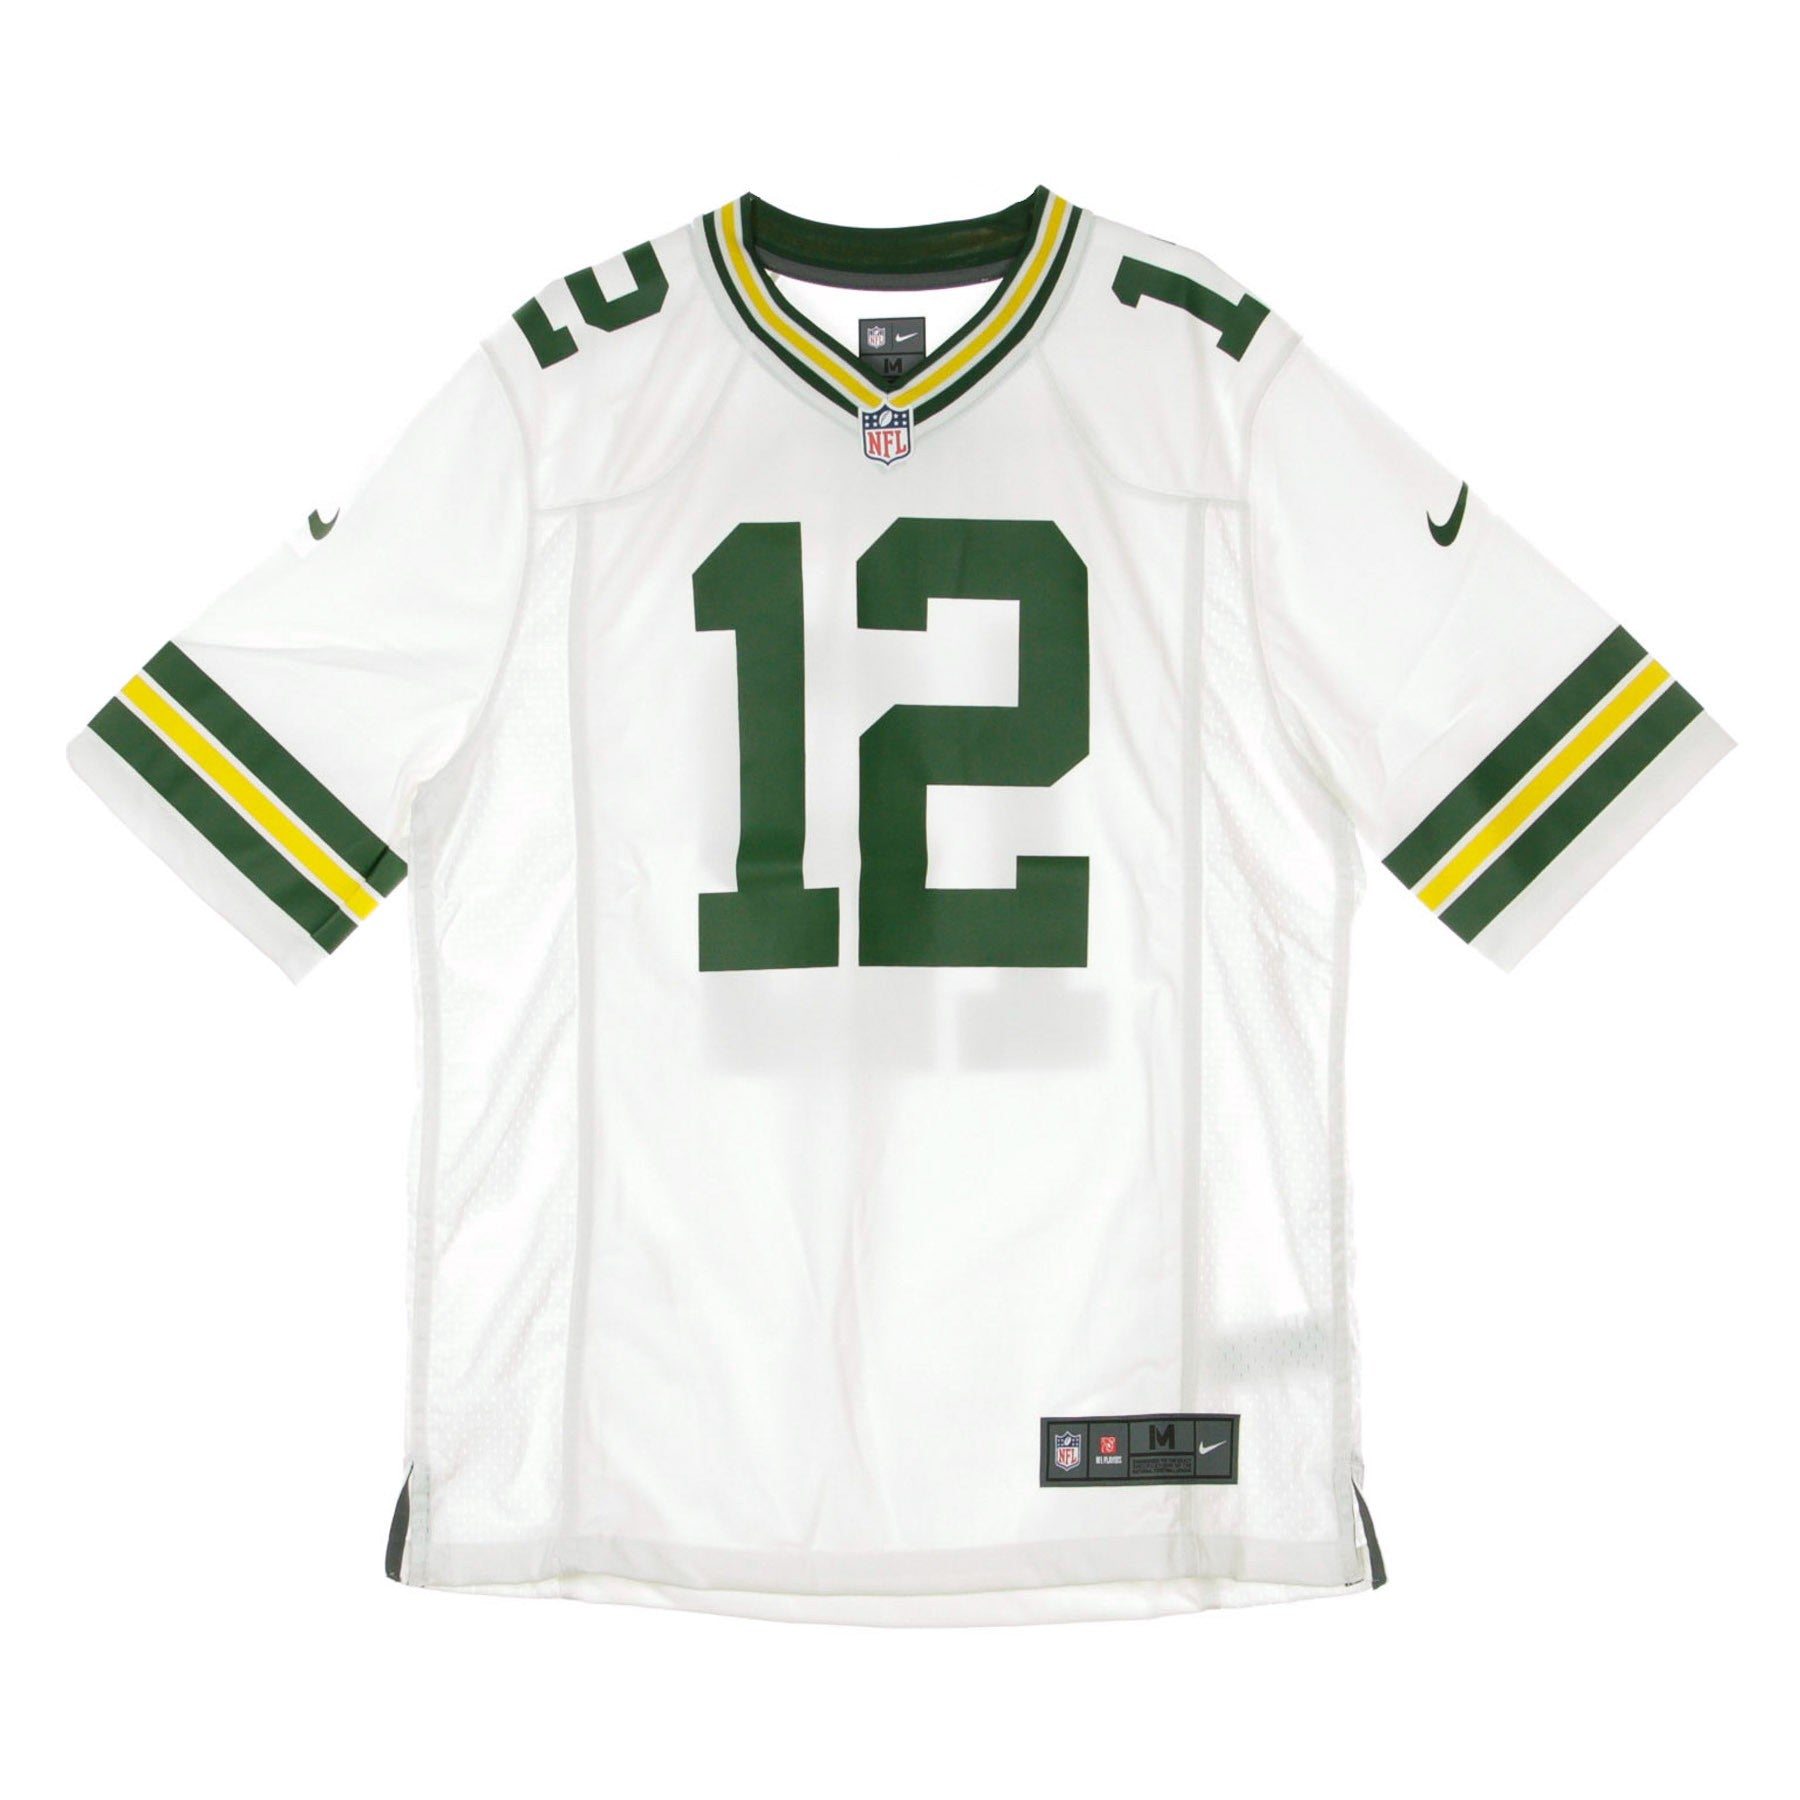 American Football Men's Jersey Nfl Game Road Jersey No.12 Rodgers Grepac White/original Team Colors